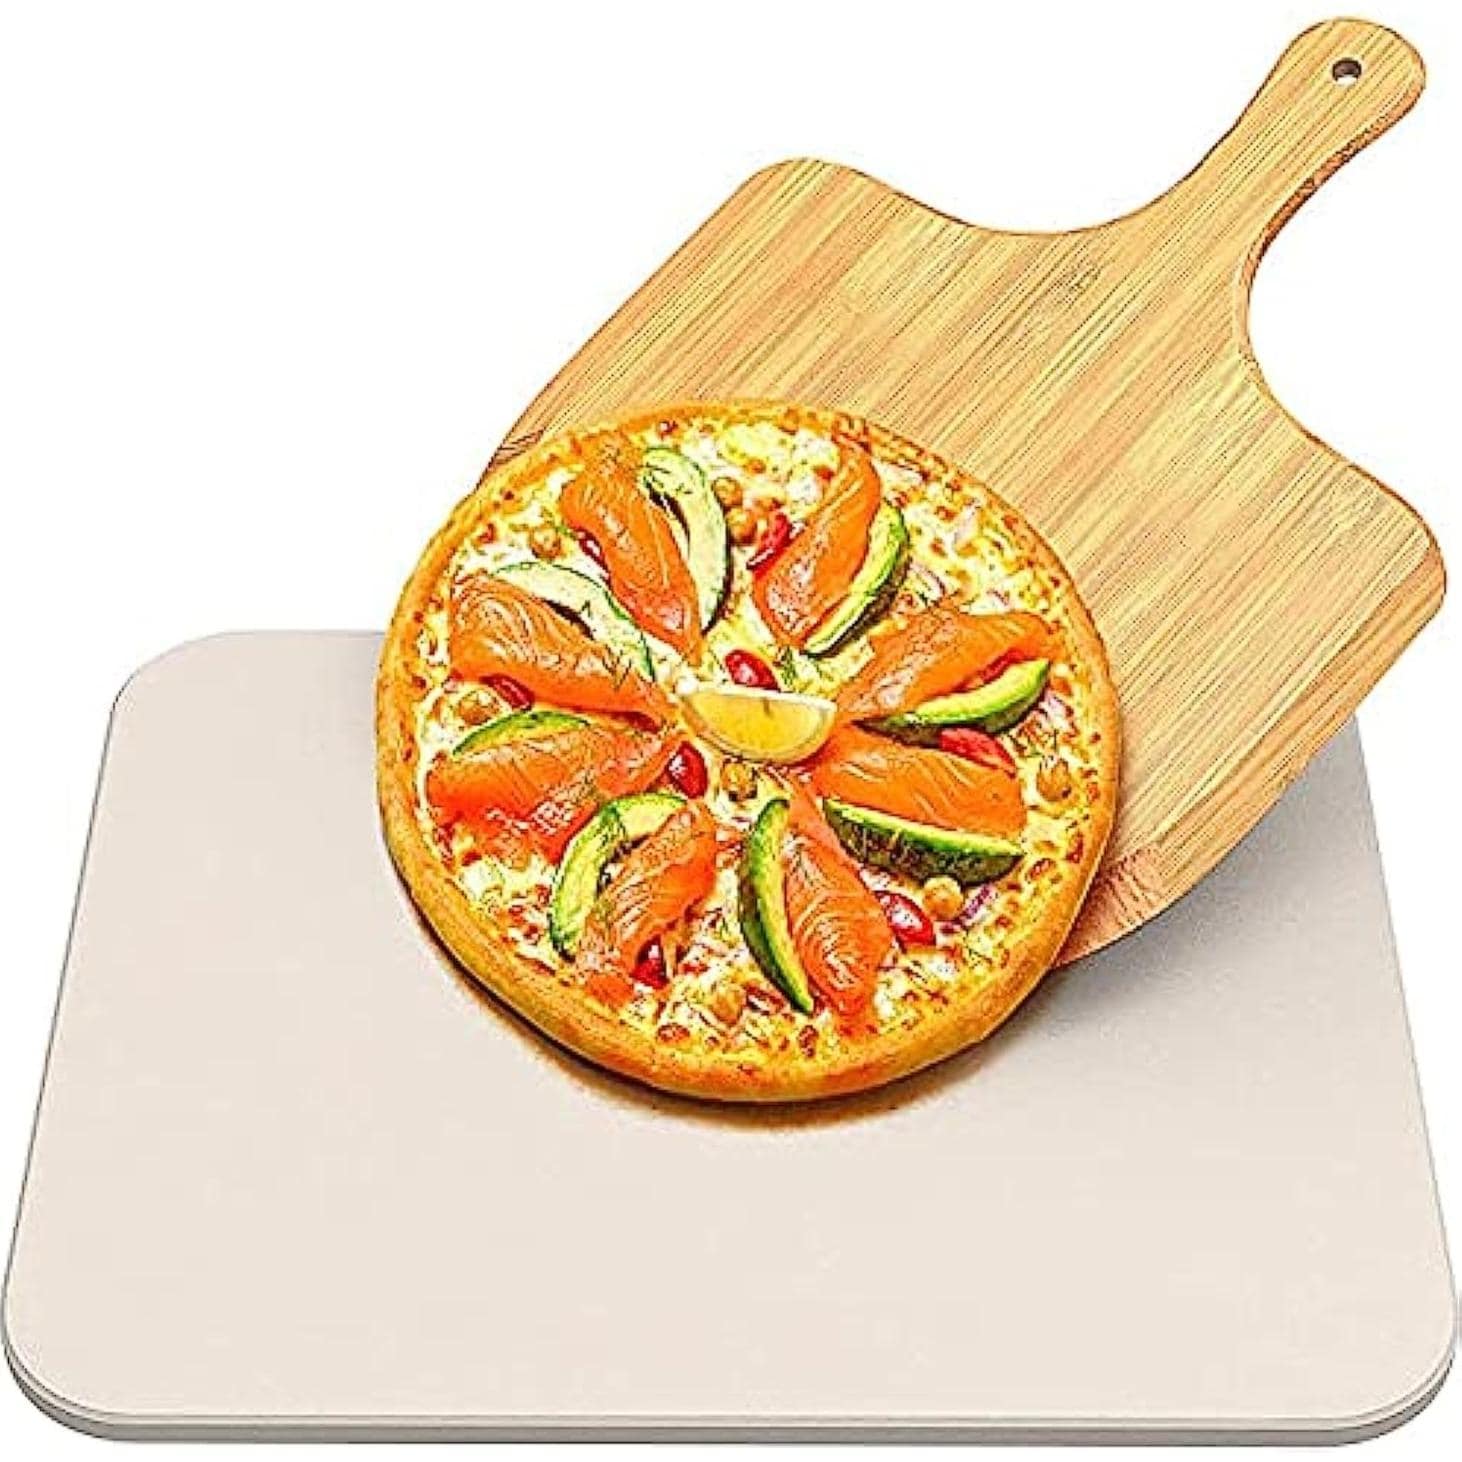 https://ak1.ostkcdn.com/images/products/is/images/direct/7aab5087acccef8bd21d5b22c7692106fc5230ba/Pizza-Stone-with-Wooden-Peel-for-Grill-and-Oven-Baking.jpg